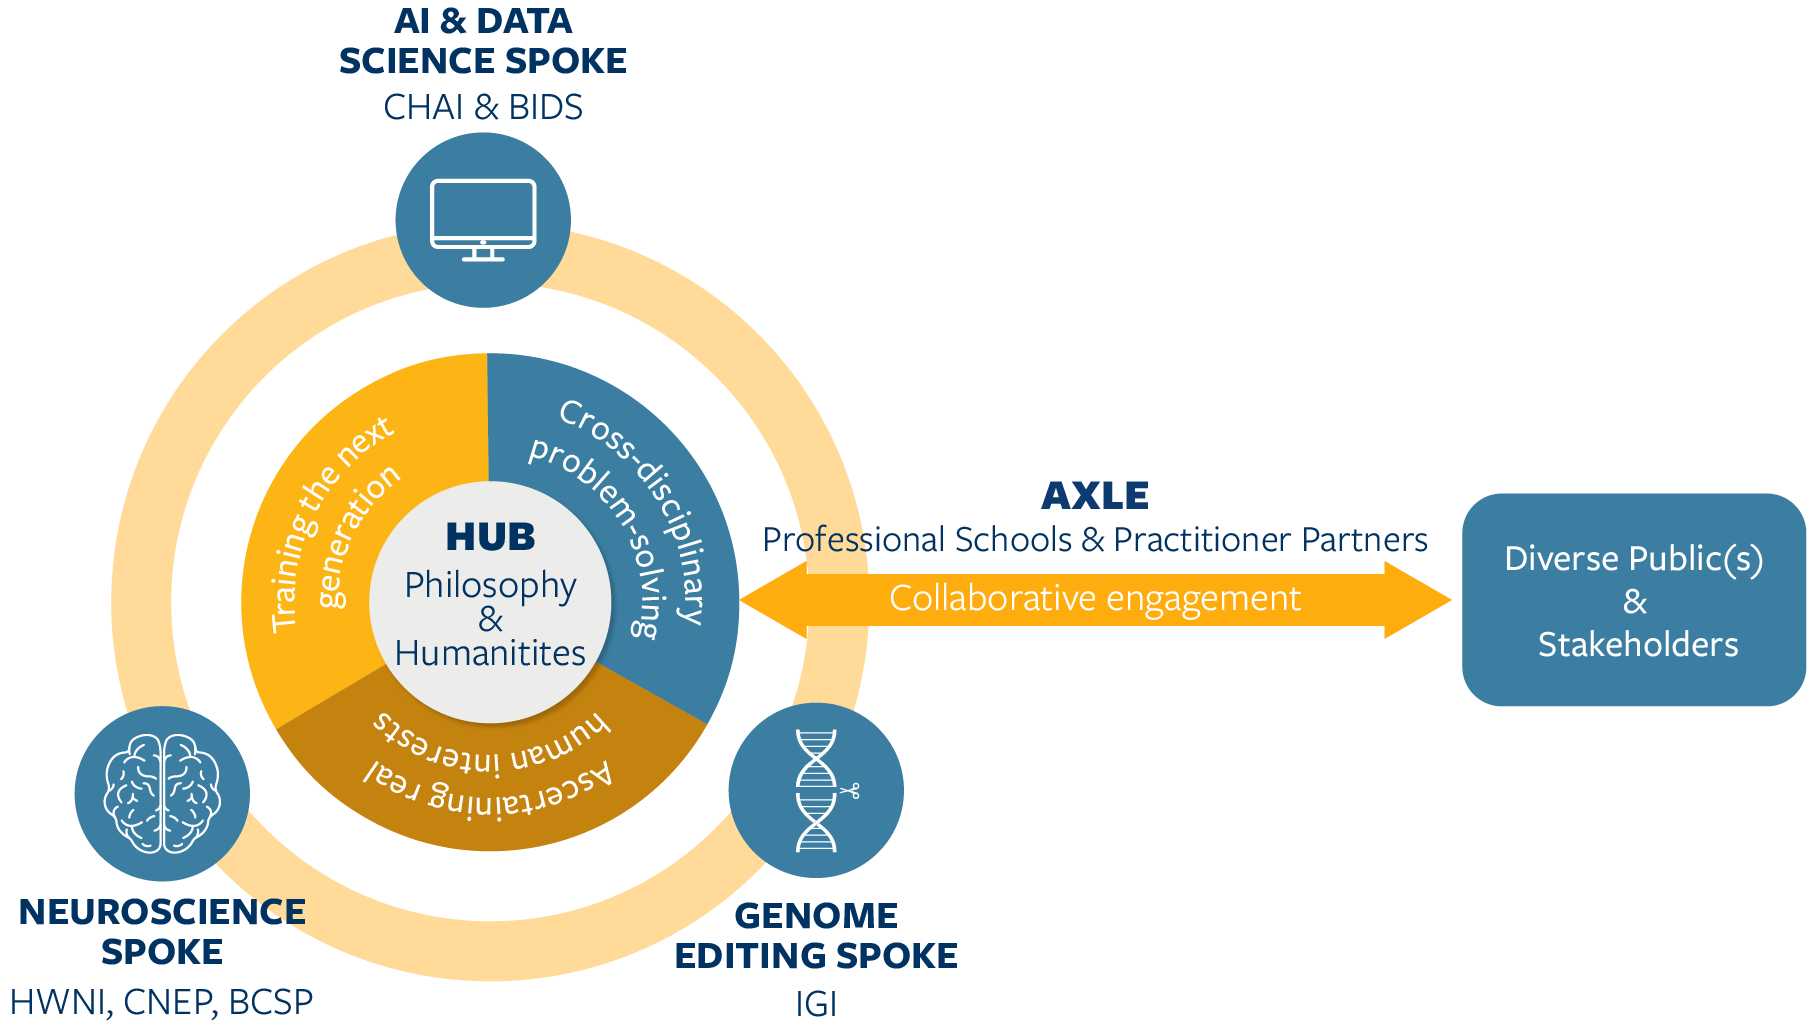 diagram of the conceptual organization model of hub, spoke, and axle.